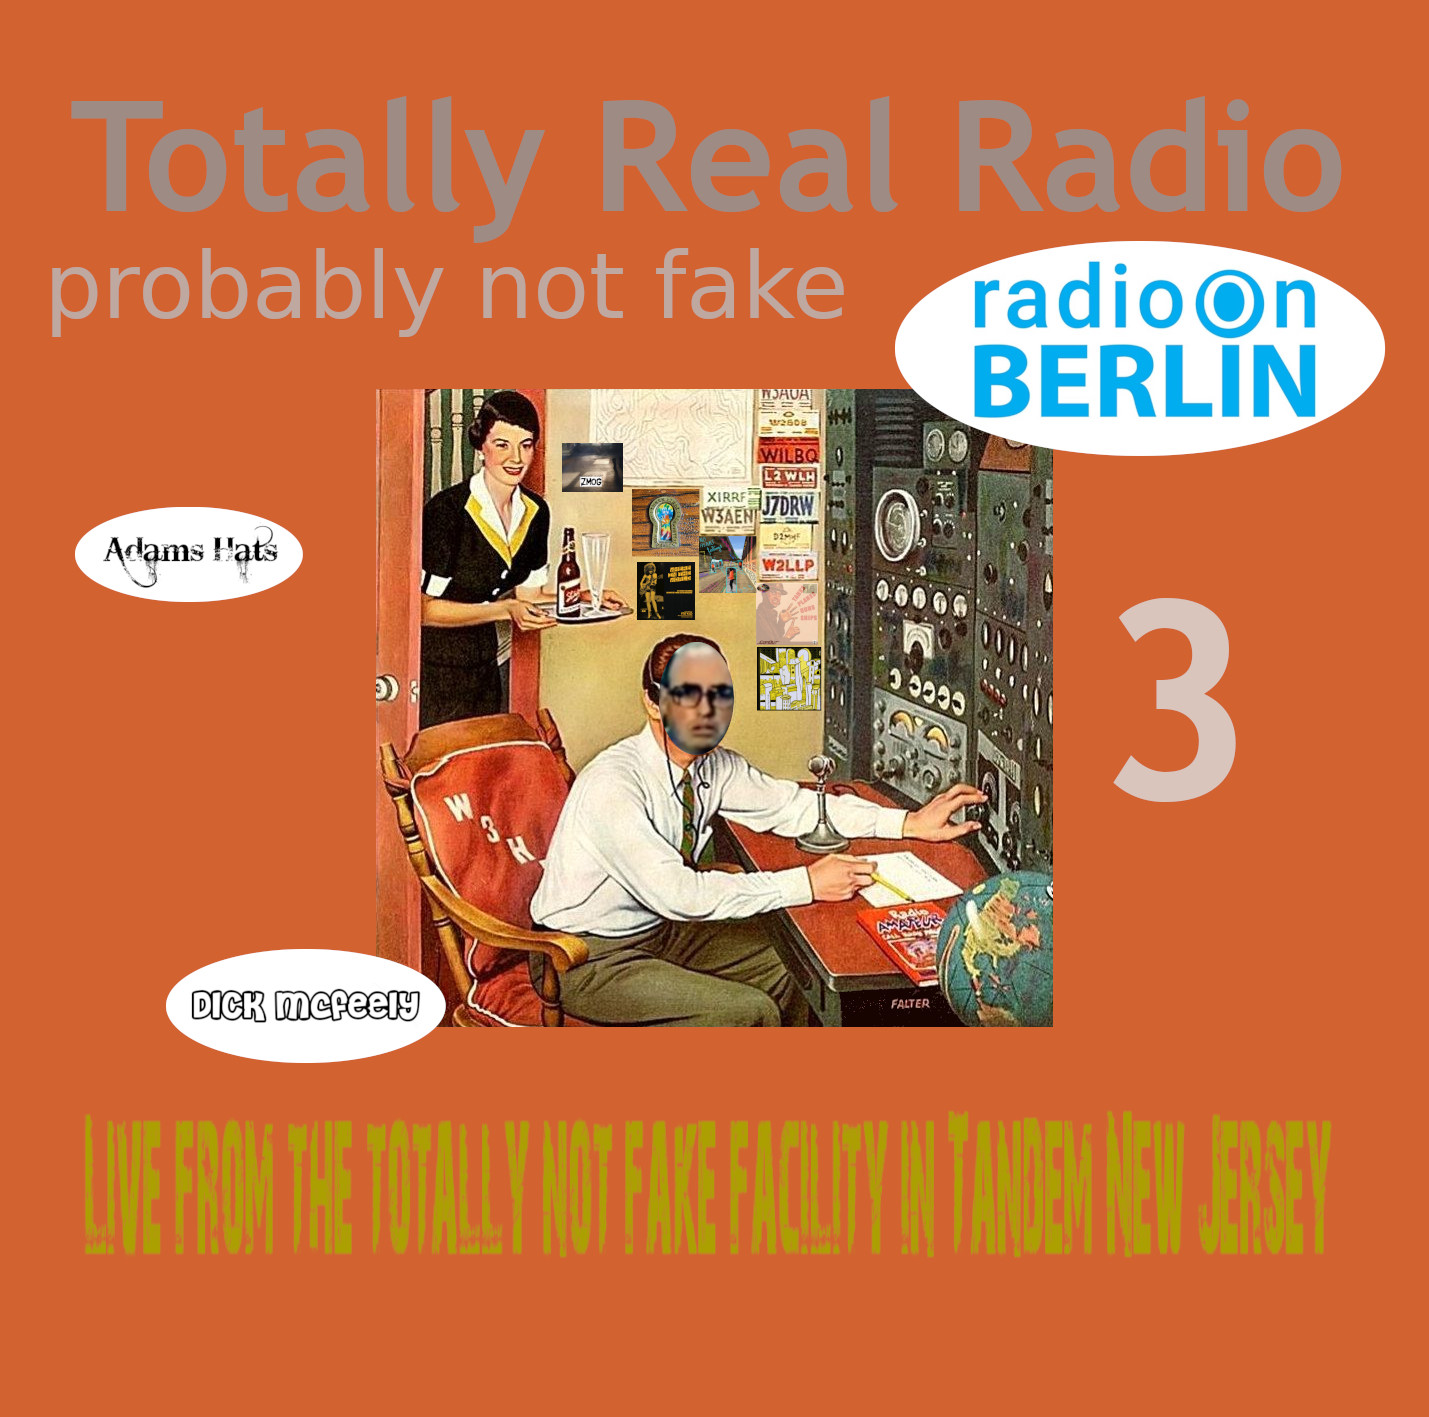 Totally real probably not fake radio – episode 3